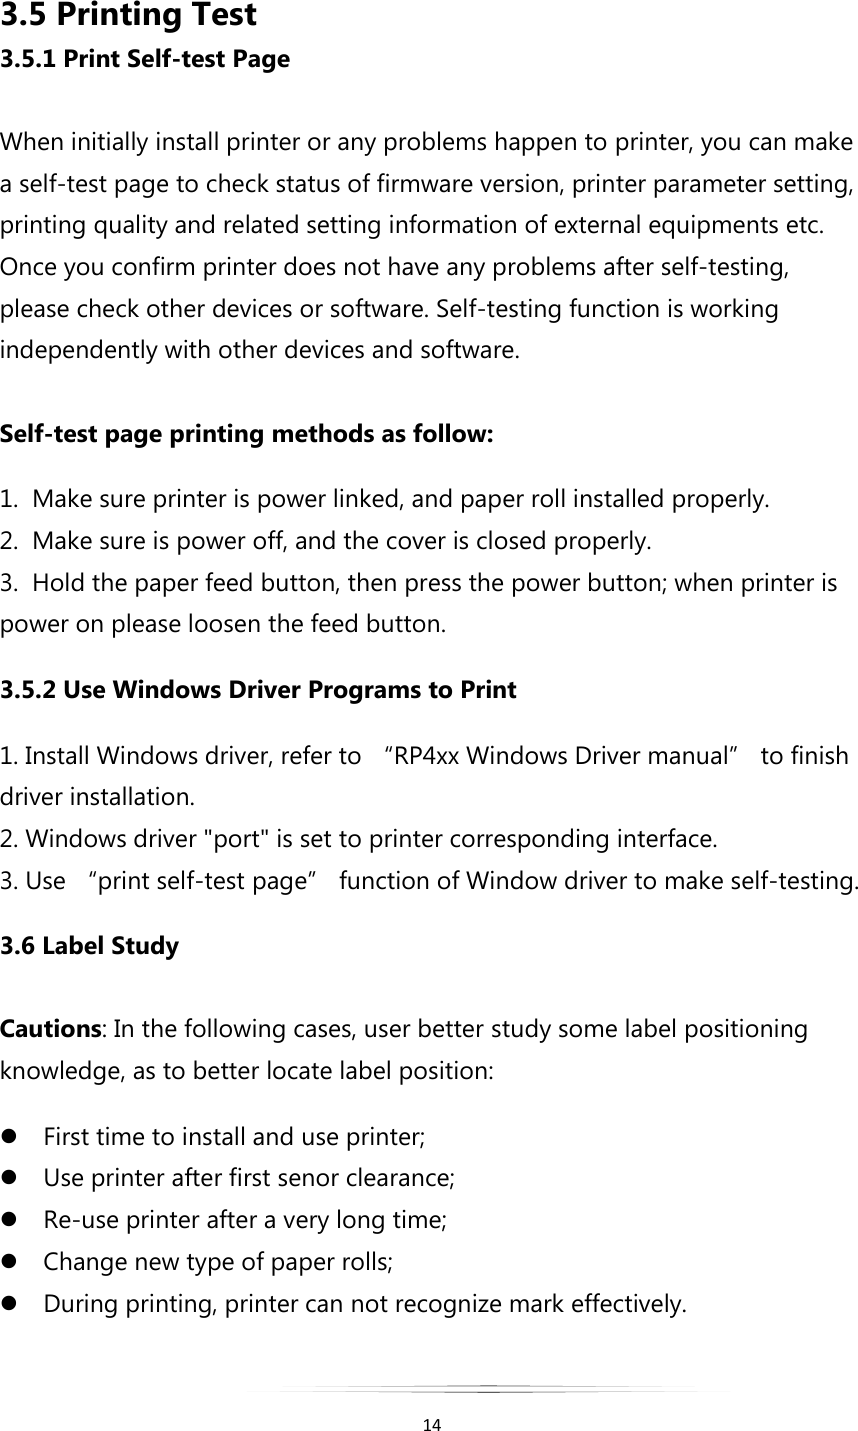   14  3.5 Printing Test 3.5.1 Print Self-test Page  When initially install printer or any problems happen to printer, you can make a self-test page to check status of firmware version, printer parameter setting, printing quality and related setting information of external equipments etc. Once you confirm printer does not have any problems after self-testing, please check other devices or software. Self-testing function is working independently with other devices and software.  Self-test page printing methods as follow:   1.  Make sure printer is power linked, and paper roll installed properly. 2.  Make sure is power off, and the cover is closed properly. 3.  Hold the paper feed button, then press the power button; when printer is power on please loosen the feed button. 3.5.2 Use Windows Driver Programs to Print 1. Install Windows driver, refer to “RP4xx Windows Driver manual” to finish driver installation. 2. Windows driver &quot;port&quot; is set to printer corresponding interface. 3. Use “print self-test page” function of Window driver to make self-testing. 3.6 Label Study  Cautions: In the following cases, user better study some label positioning knowledge, as to better locate label position:  First time to install and use printer;  Use printer after first senor clearance;  Re-use printer after a very long time;  Change new type of paper rolls;  During printing, printer can not recognize mark effectively. 